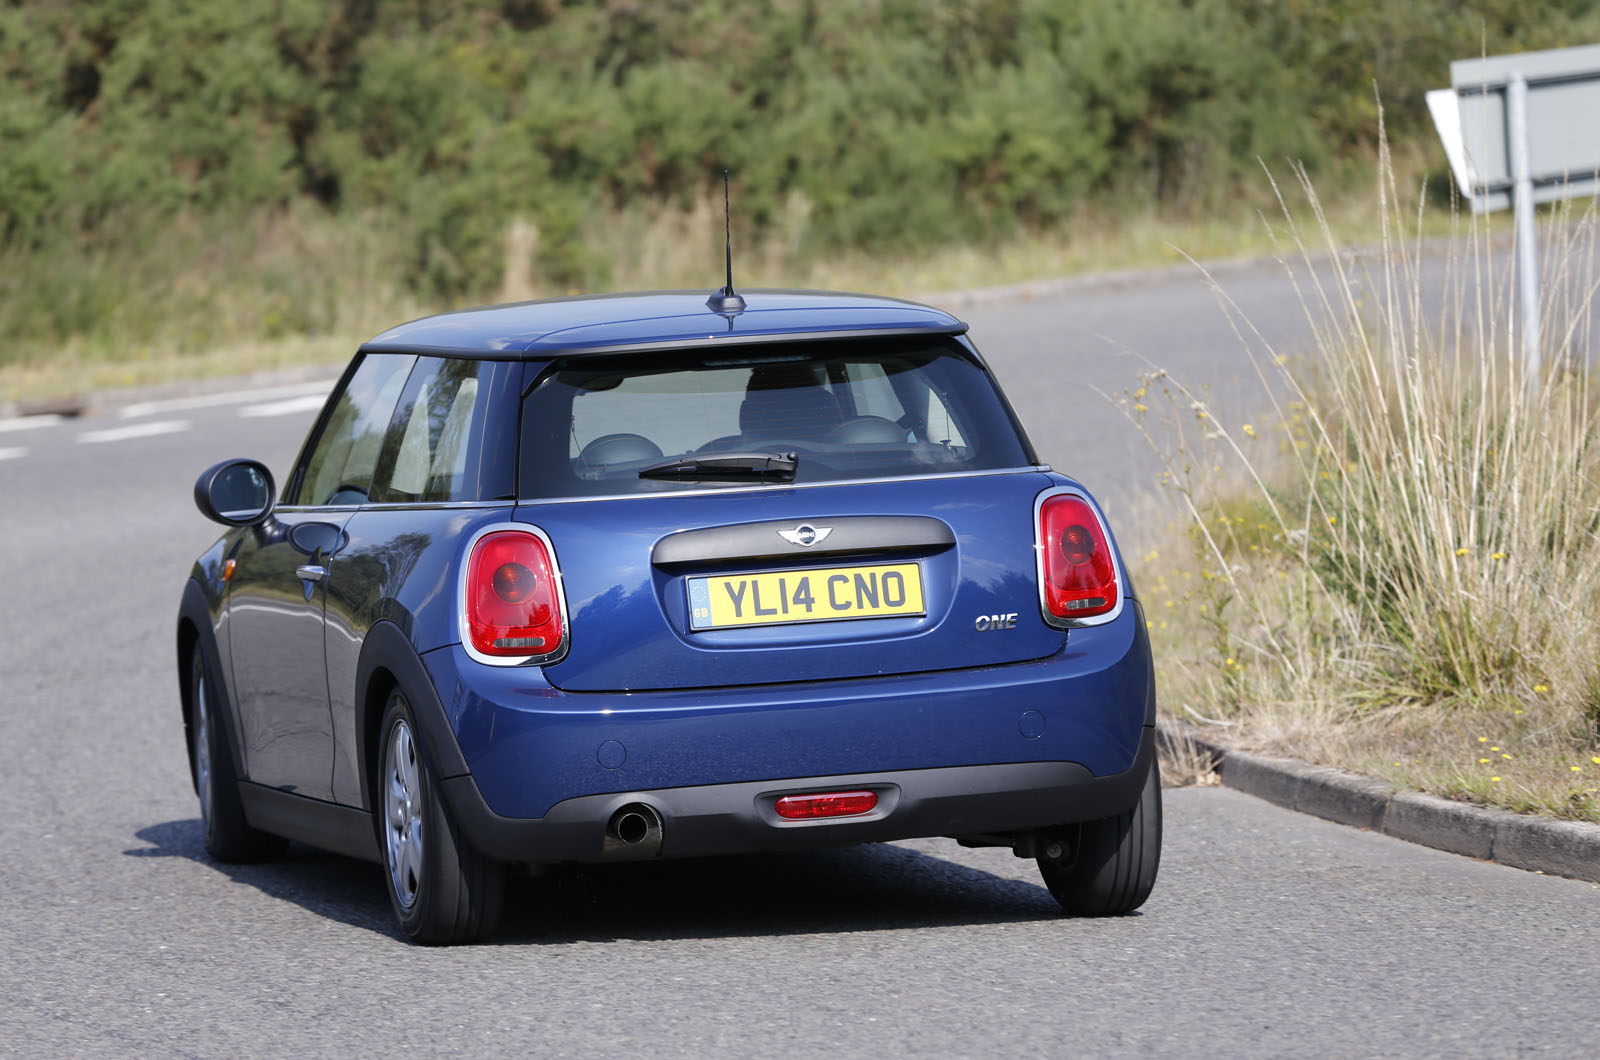 Top Gear's guide to buying a used Mini